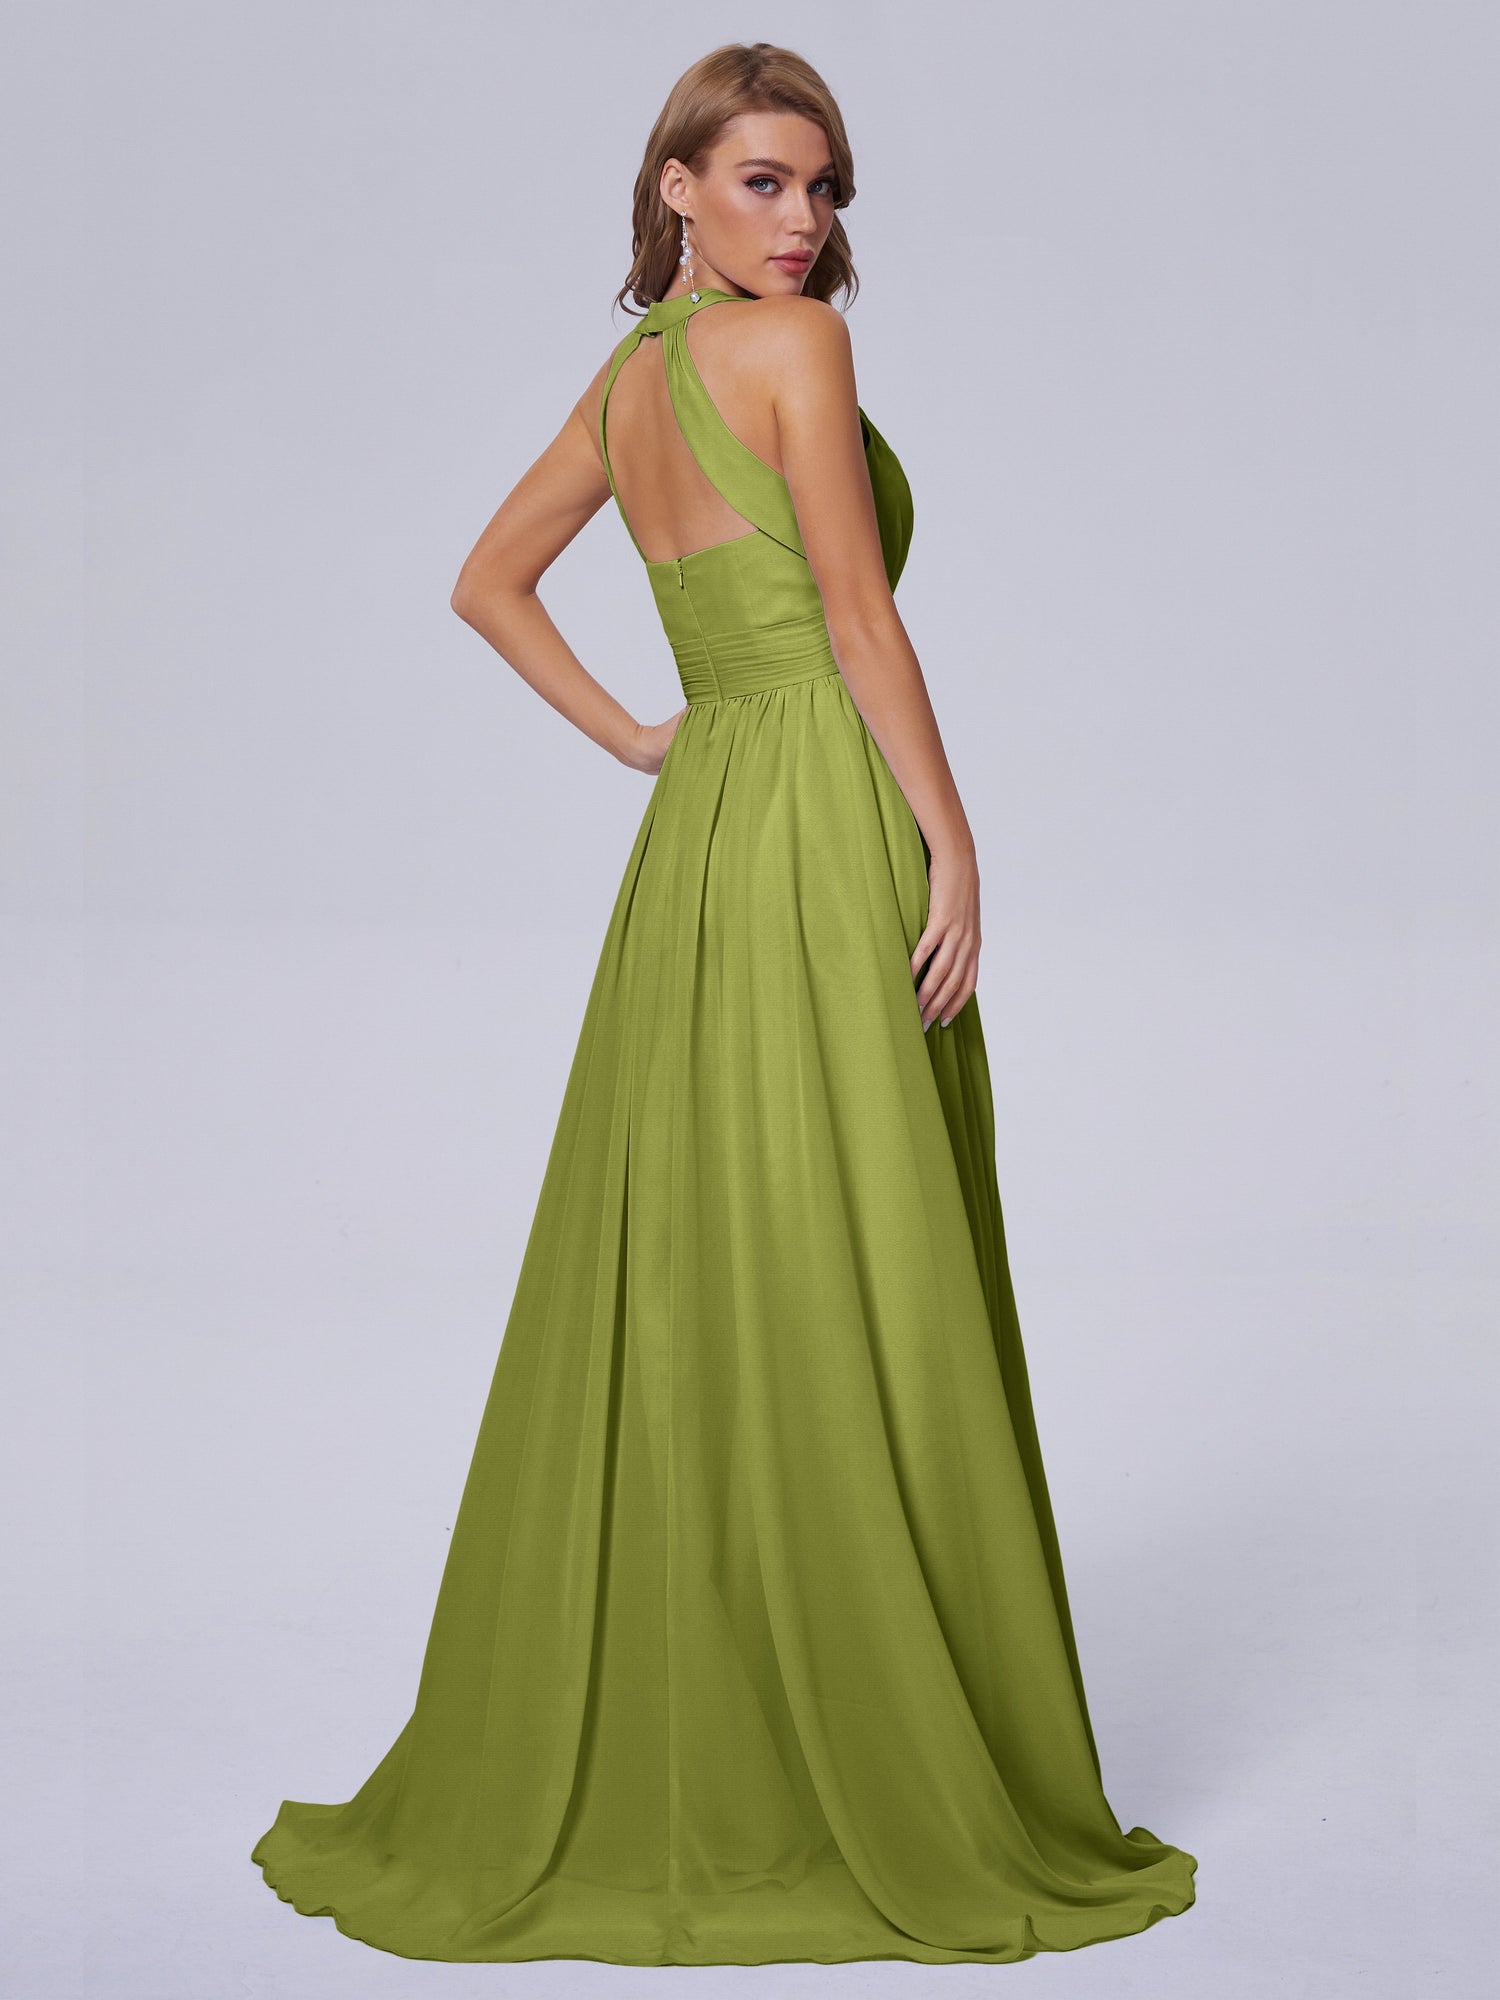 21+ Bottle Green Outfits For Bridesmaids That Are Spectacularly Elegant!